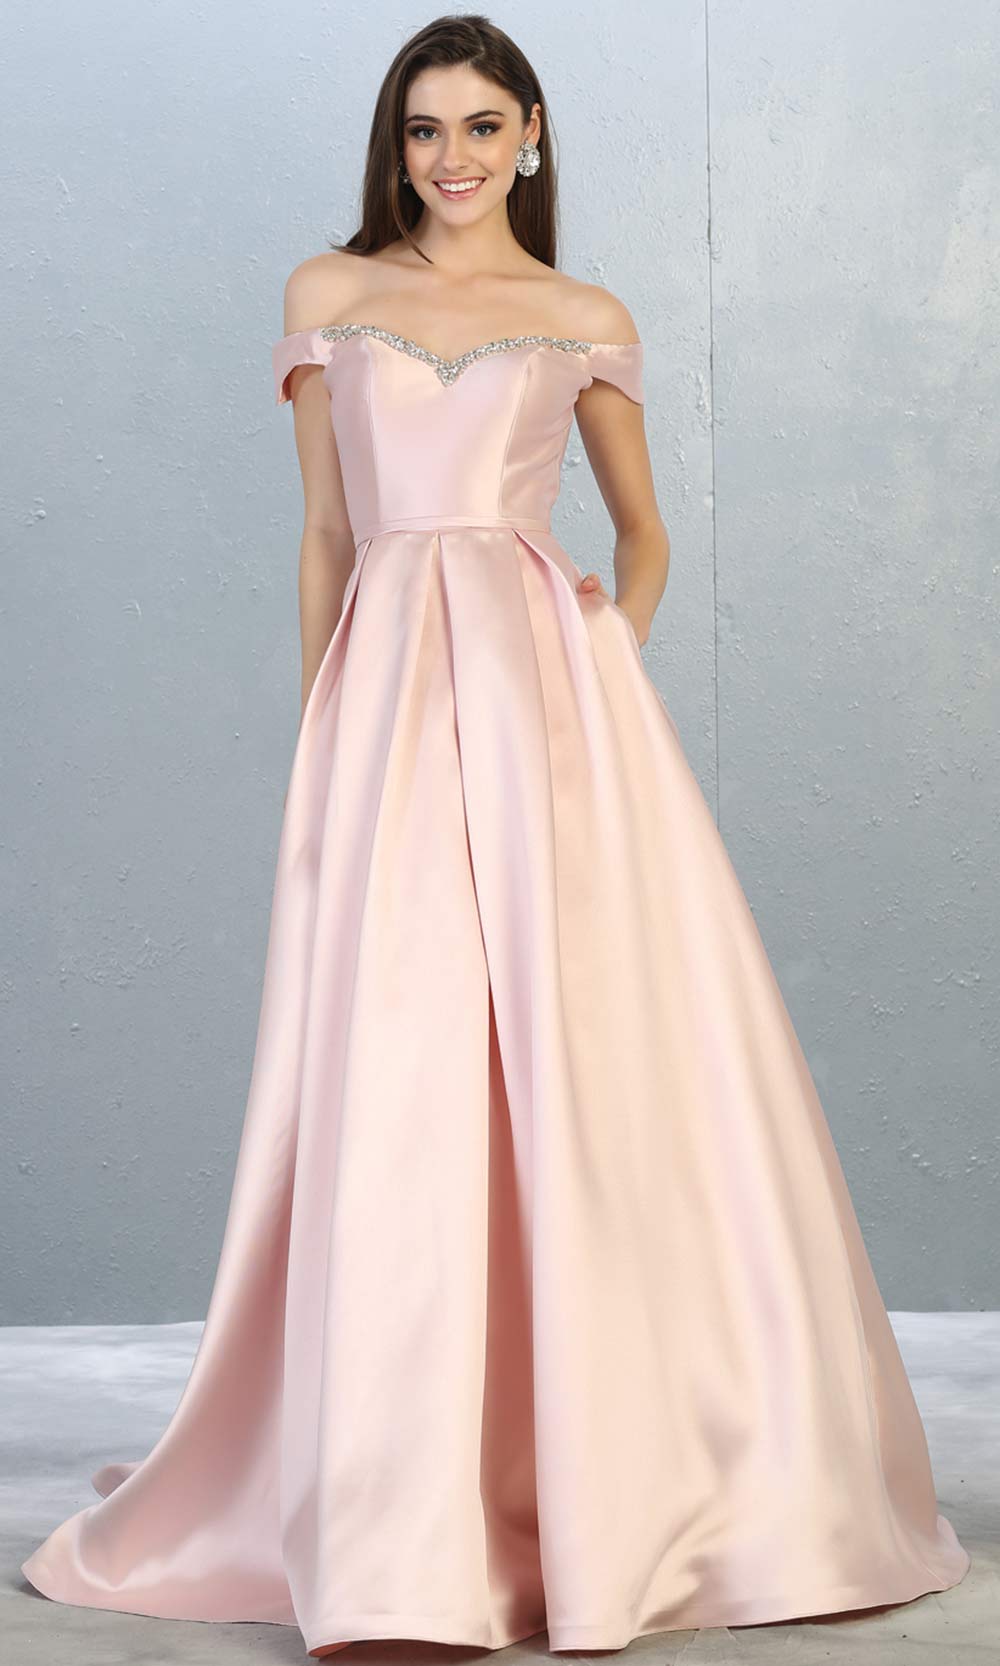 Mayqueen MQ 1784 long blush pink off shoulder evening flowy dress. Full length light pink satin taffeta gown is perfect for  enagagement/e-shoot dress, formal wedding guest, indowestern gown, evening party dress, prom, bridesmaid. Plus sizes avail.jpg